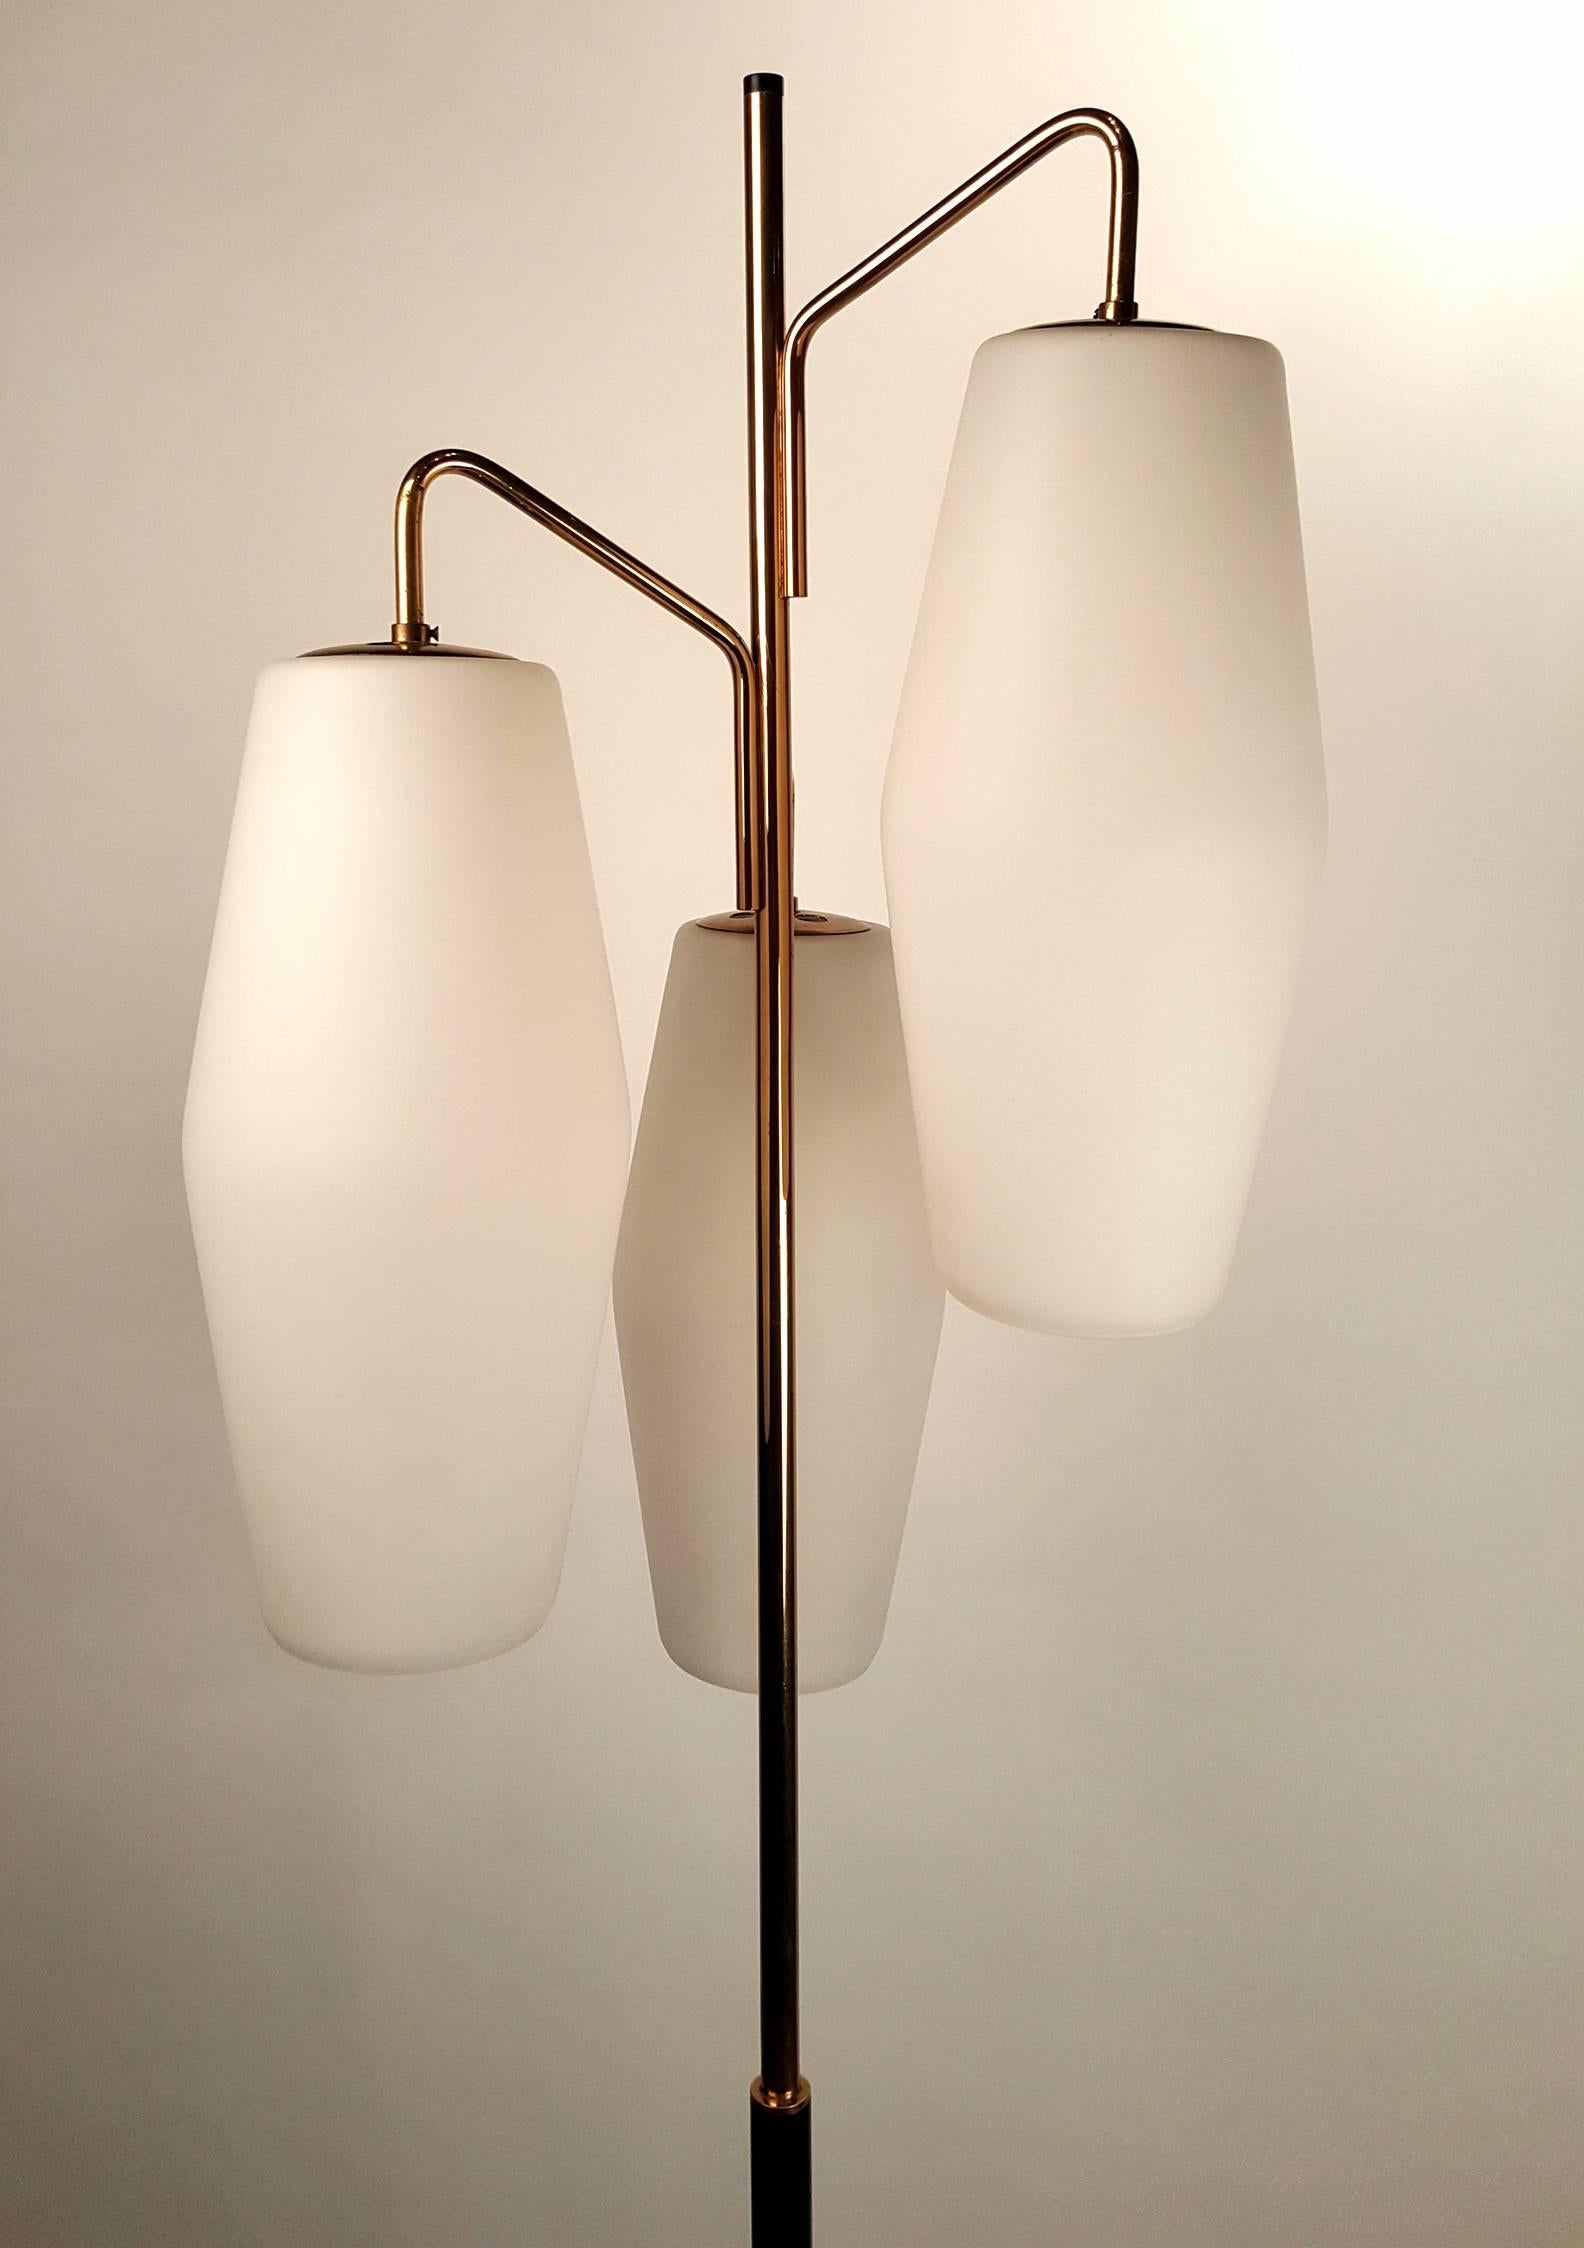 20th Century Italian Modernist Stilnovo Floor Lamp with Frosted Glass Shades and Marble Base